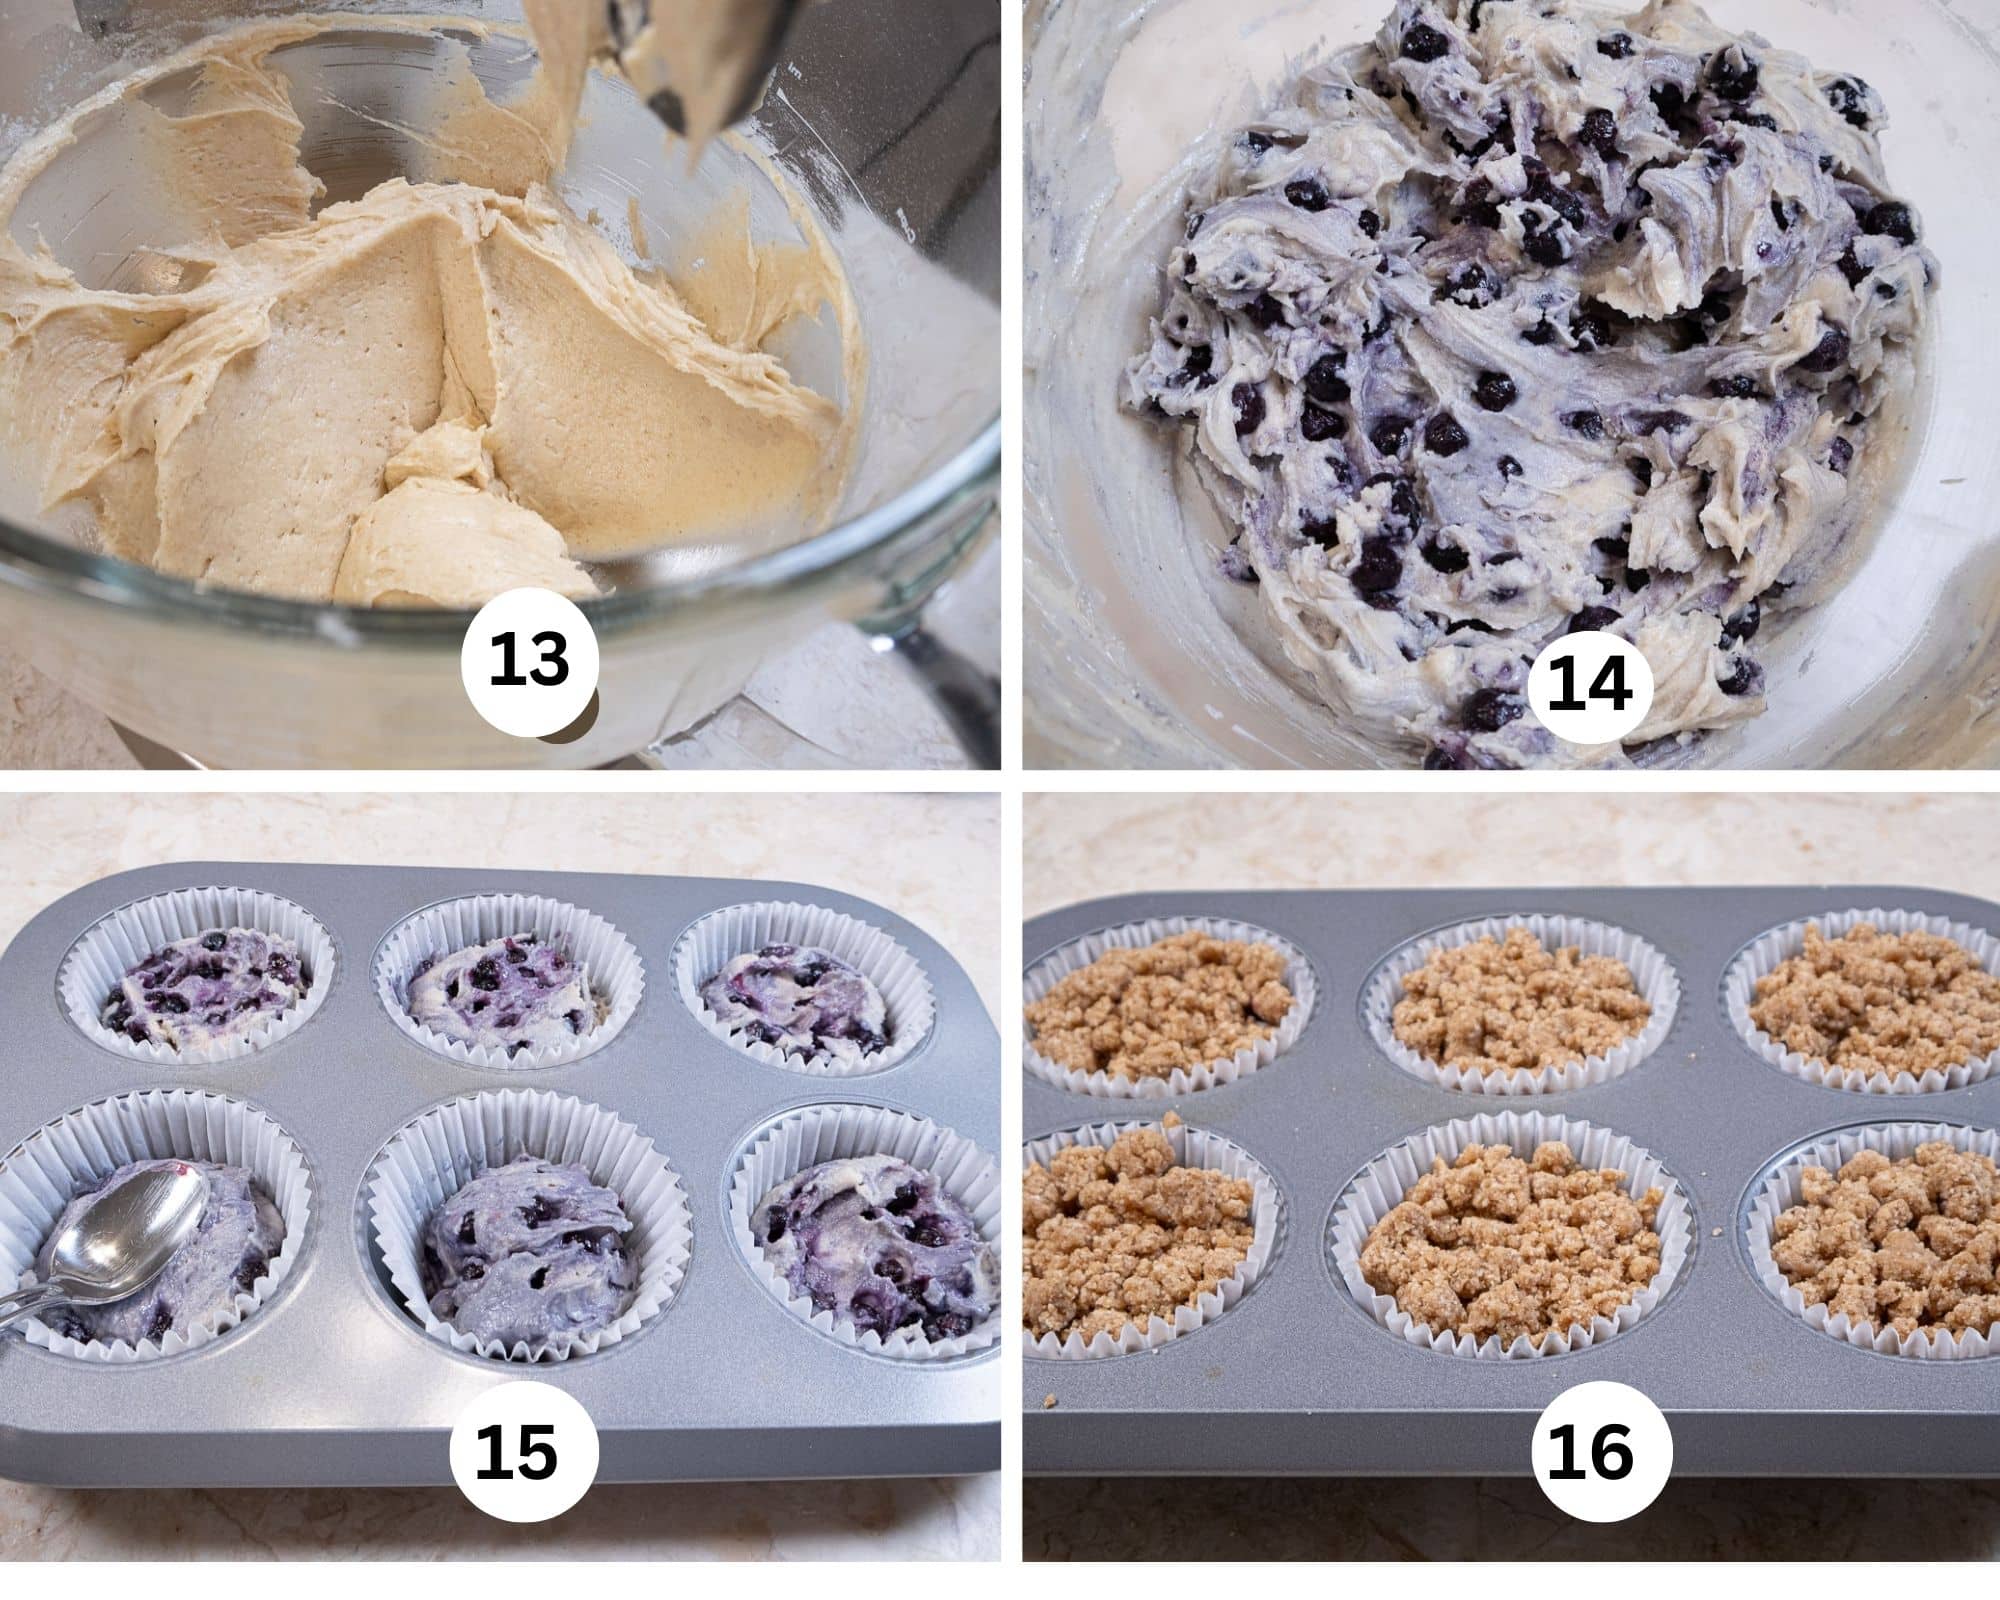 The last collages shows the finished batter, the blueberries folded in and the  muffins on a topped with crumbs.